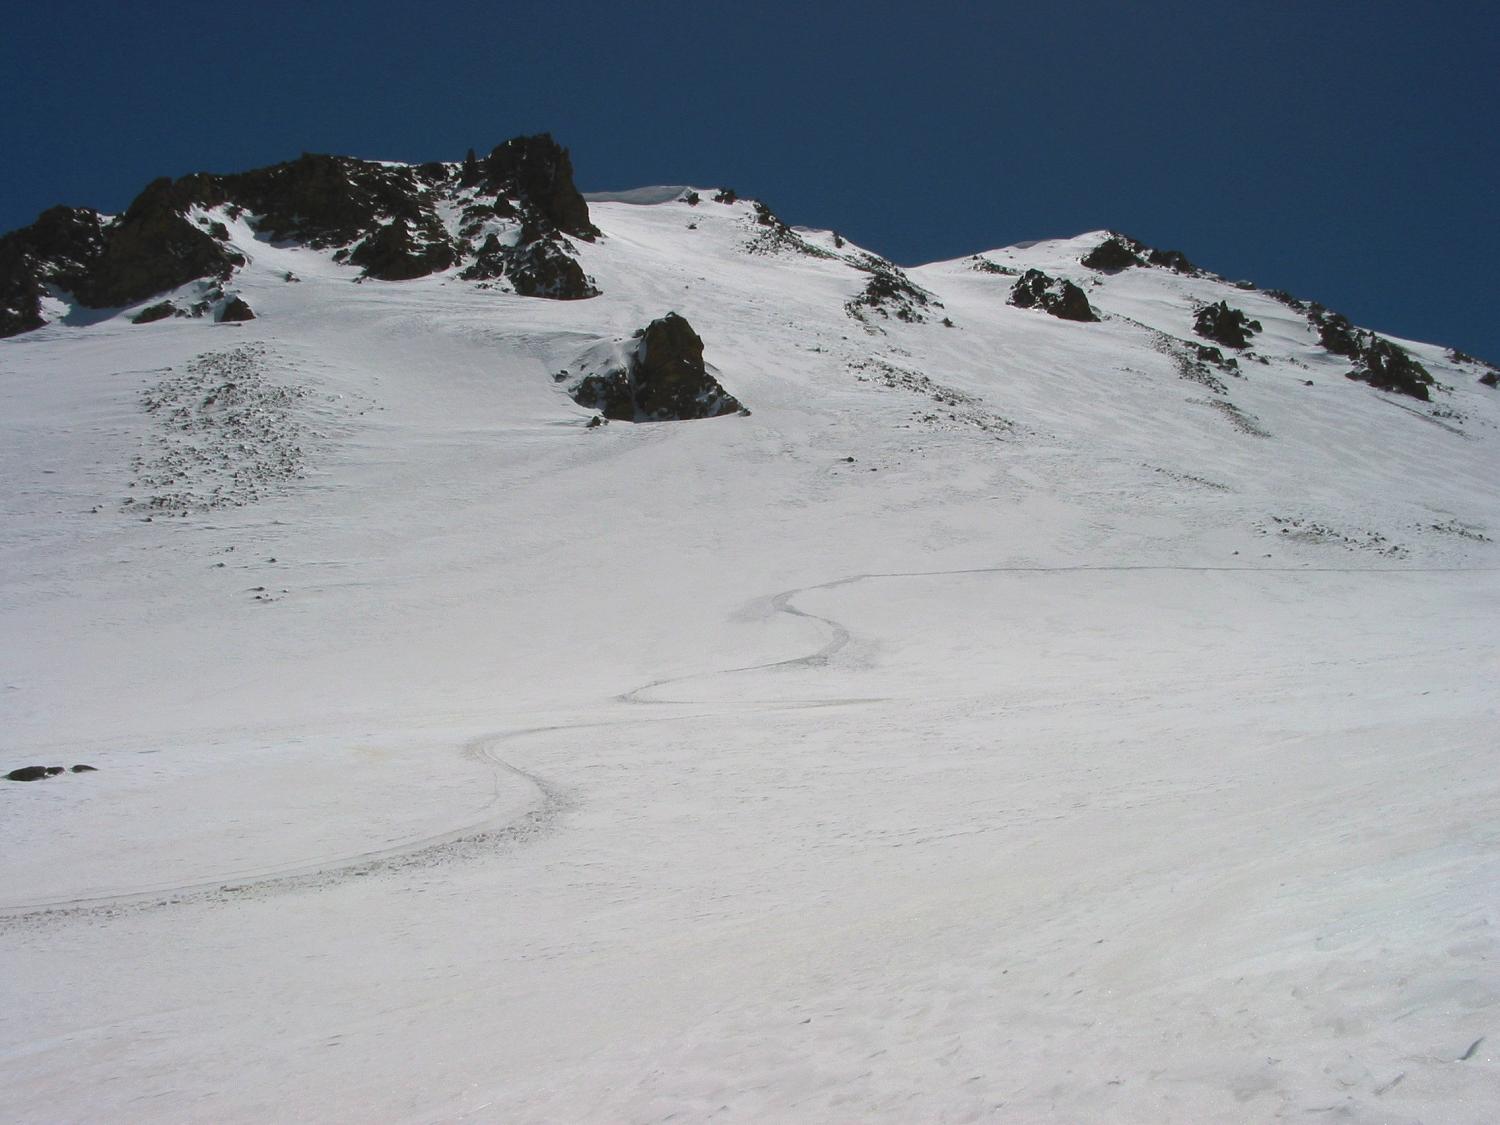 Karl Kelman skiing on another Crowded Day at Porcupine Saddle 